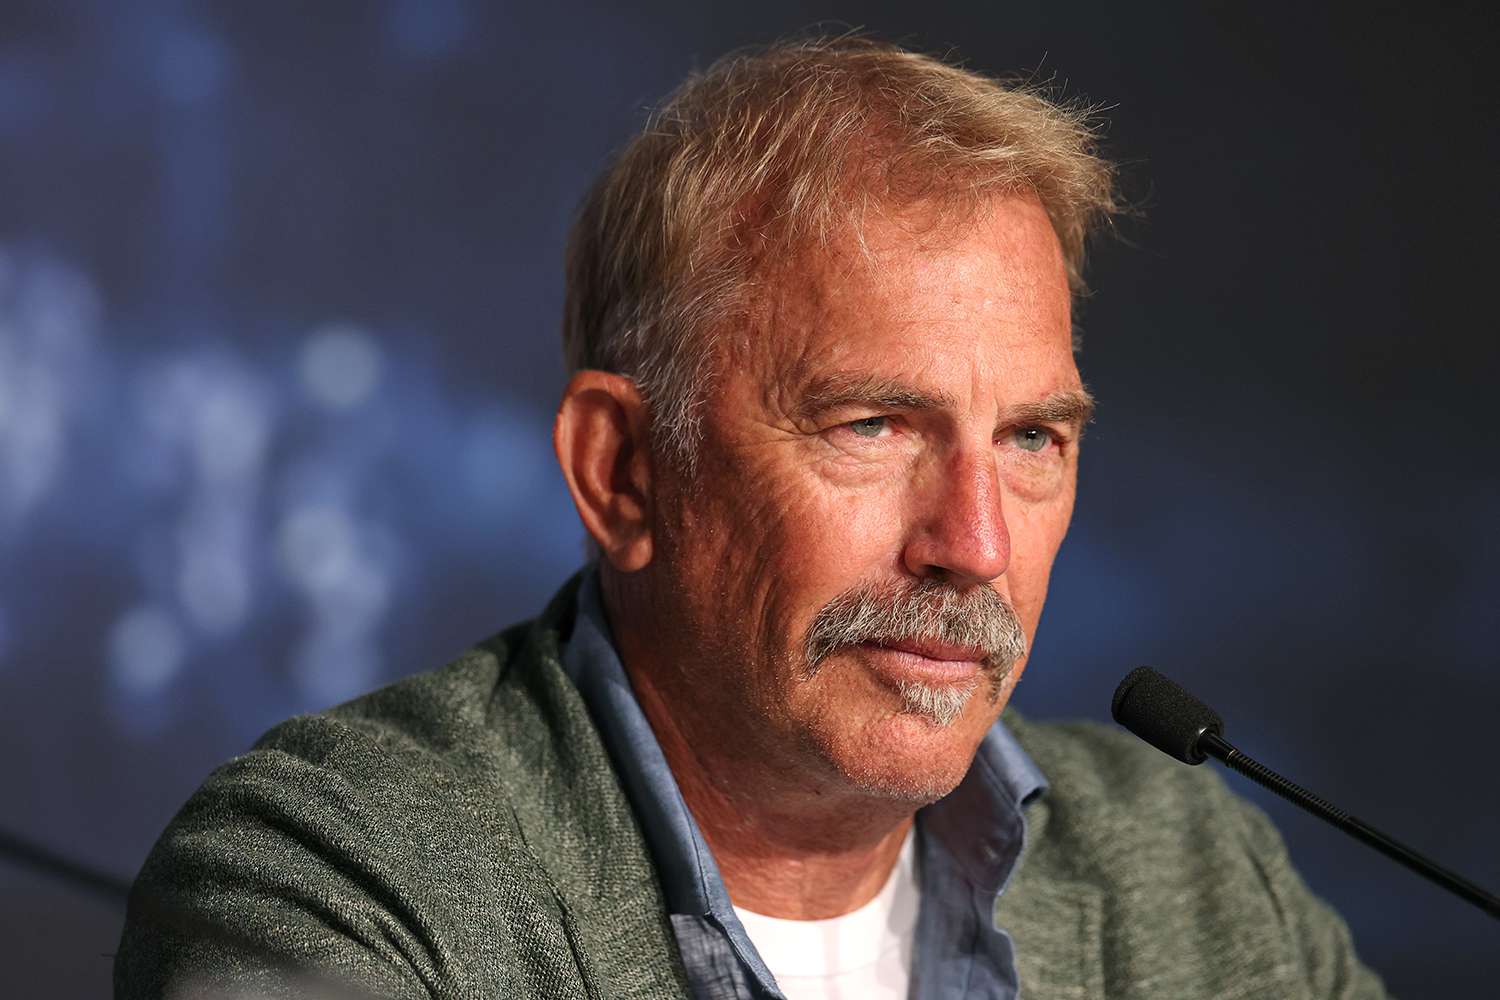 Kevin Costner Says Being from Compton Makes Diversity in Films Important to Him: 'I'm Conscious of Race'